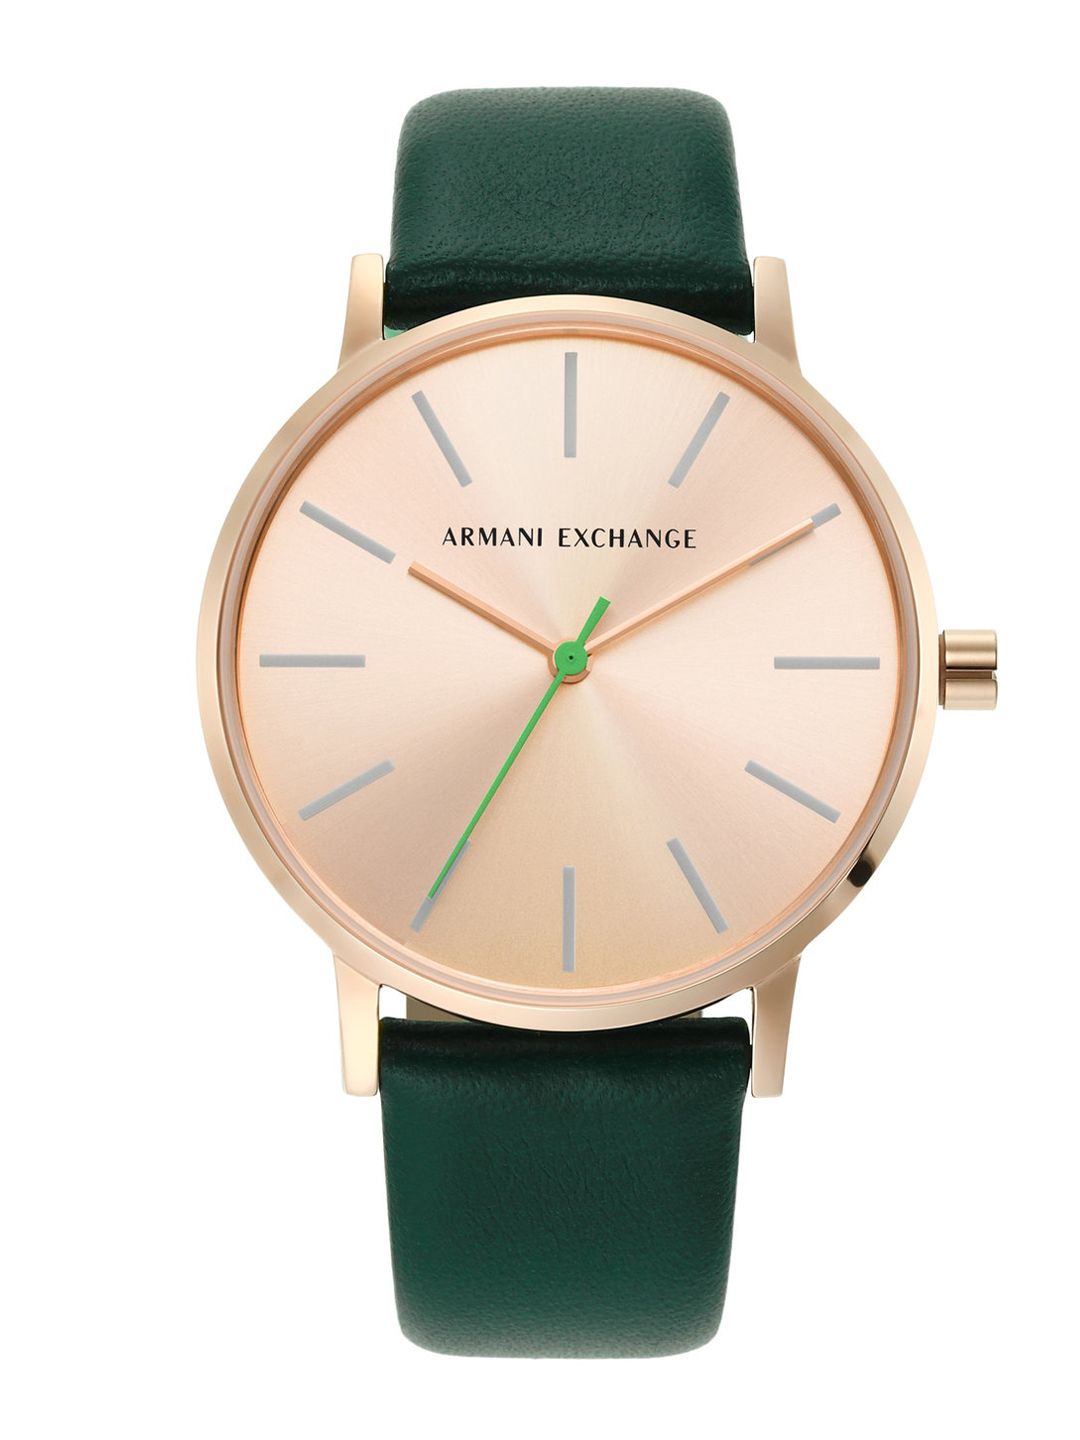 Armani Exchange Women Rose Gold-Toned Dial & Green Leather Straps Analogue Watch AX5577 Price in India